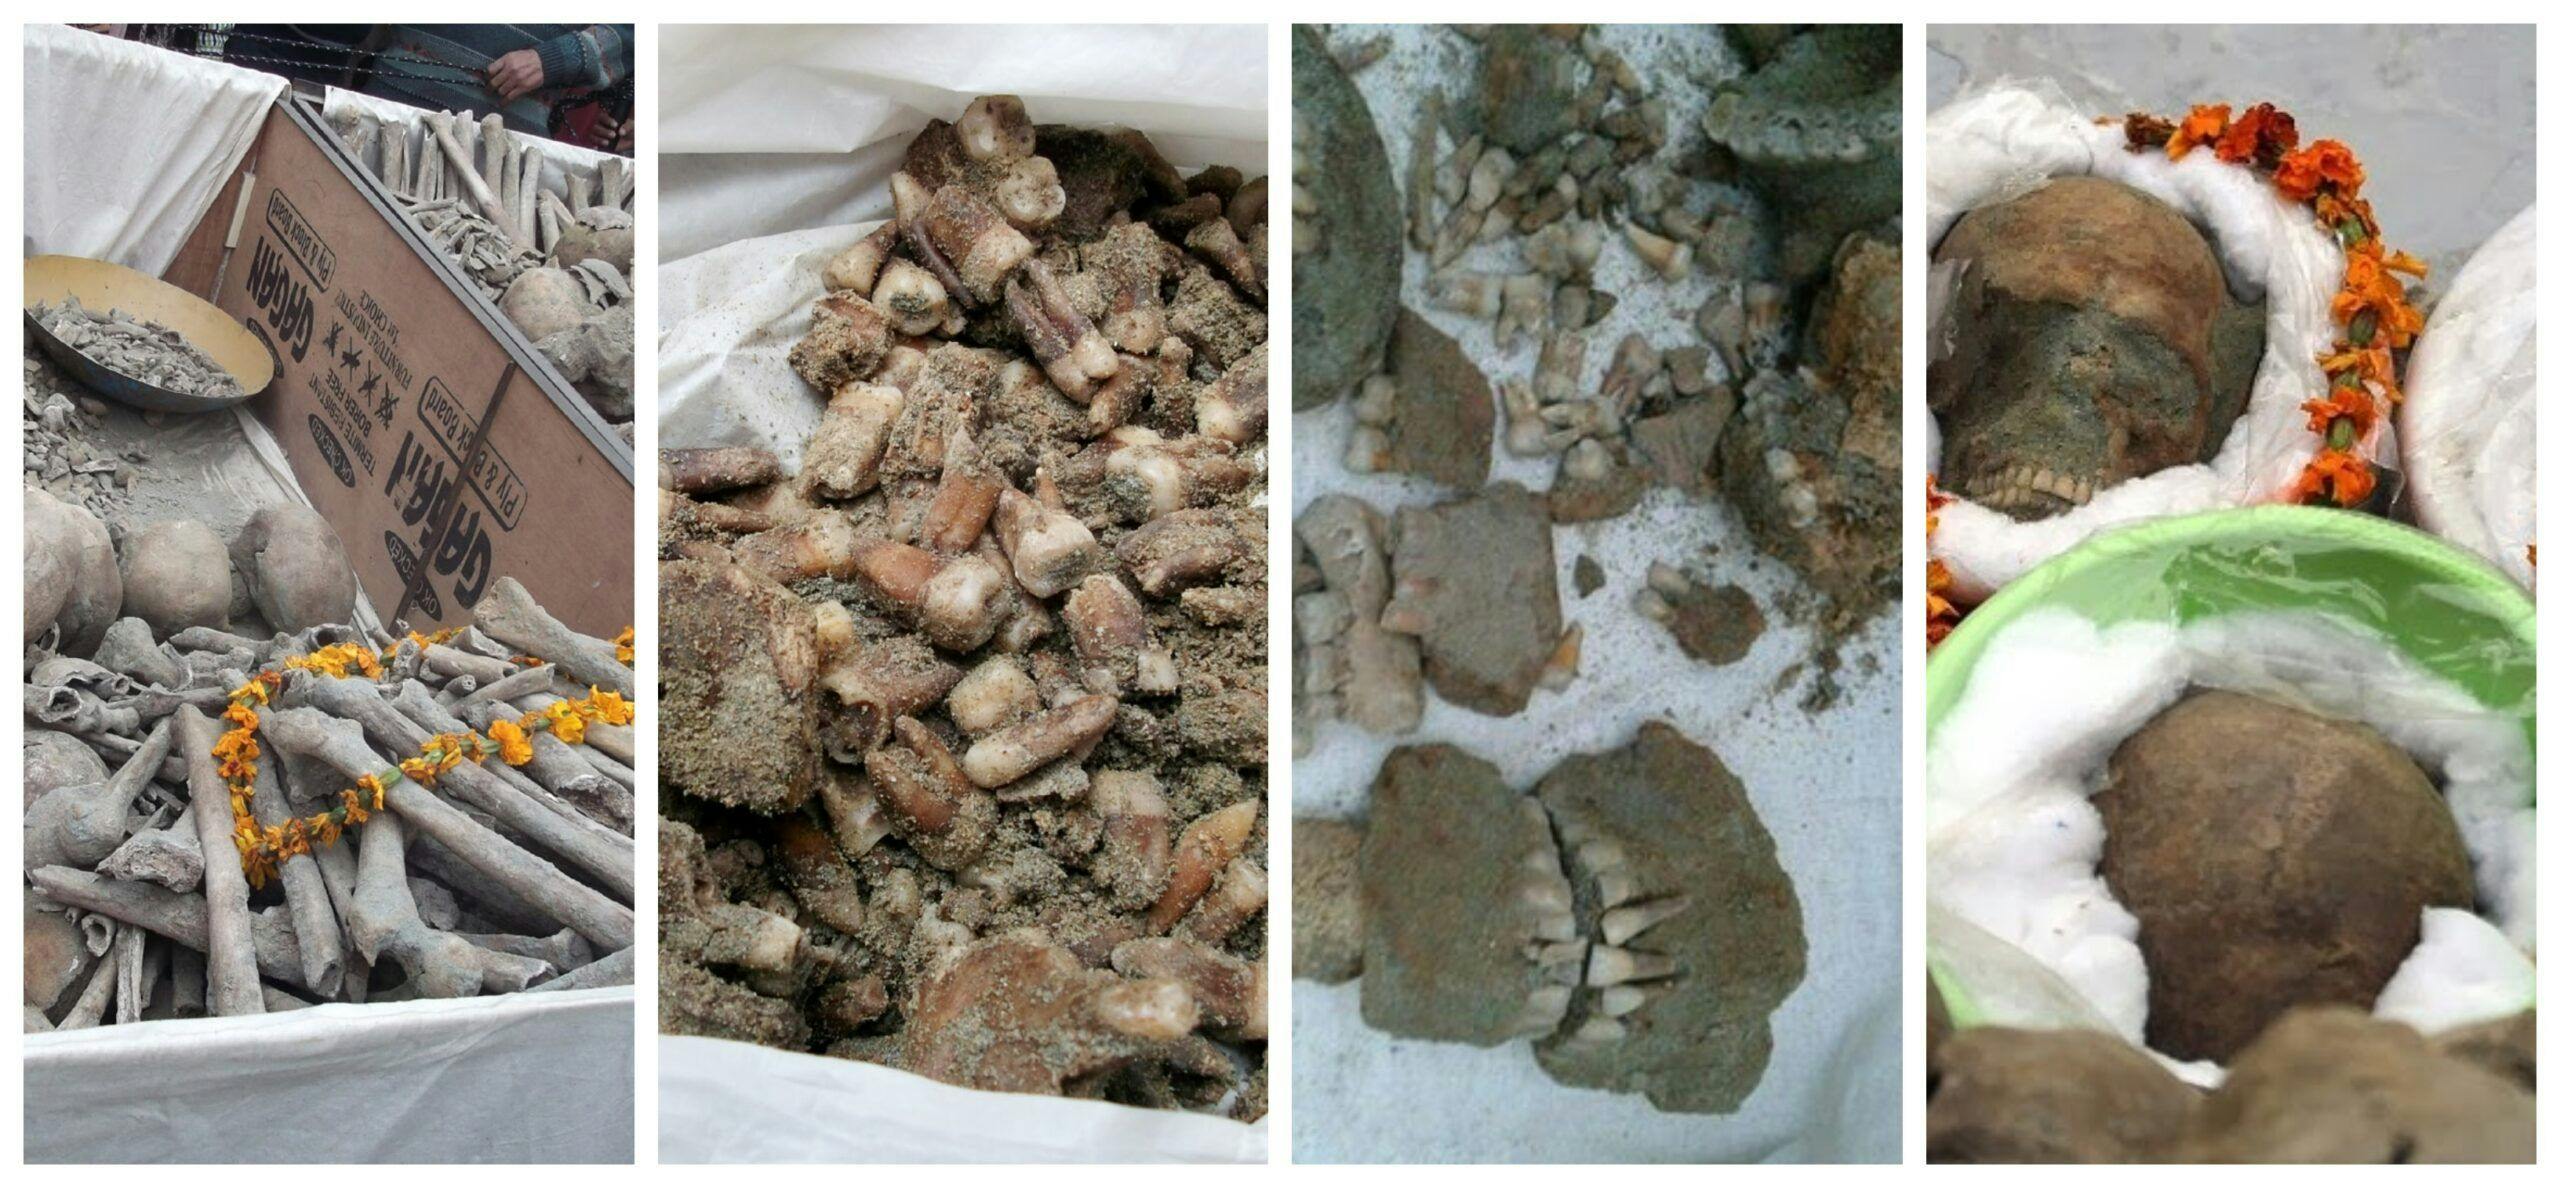 Skeletal remains found from the well